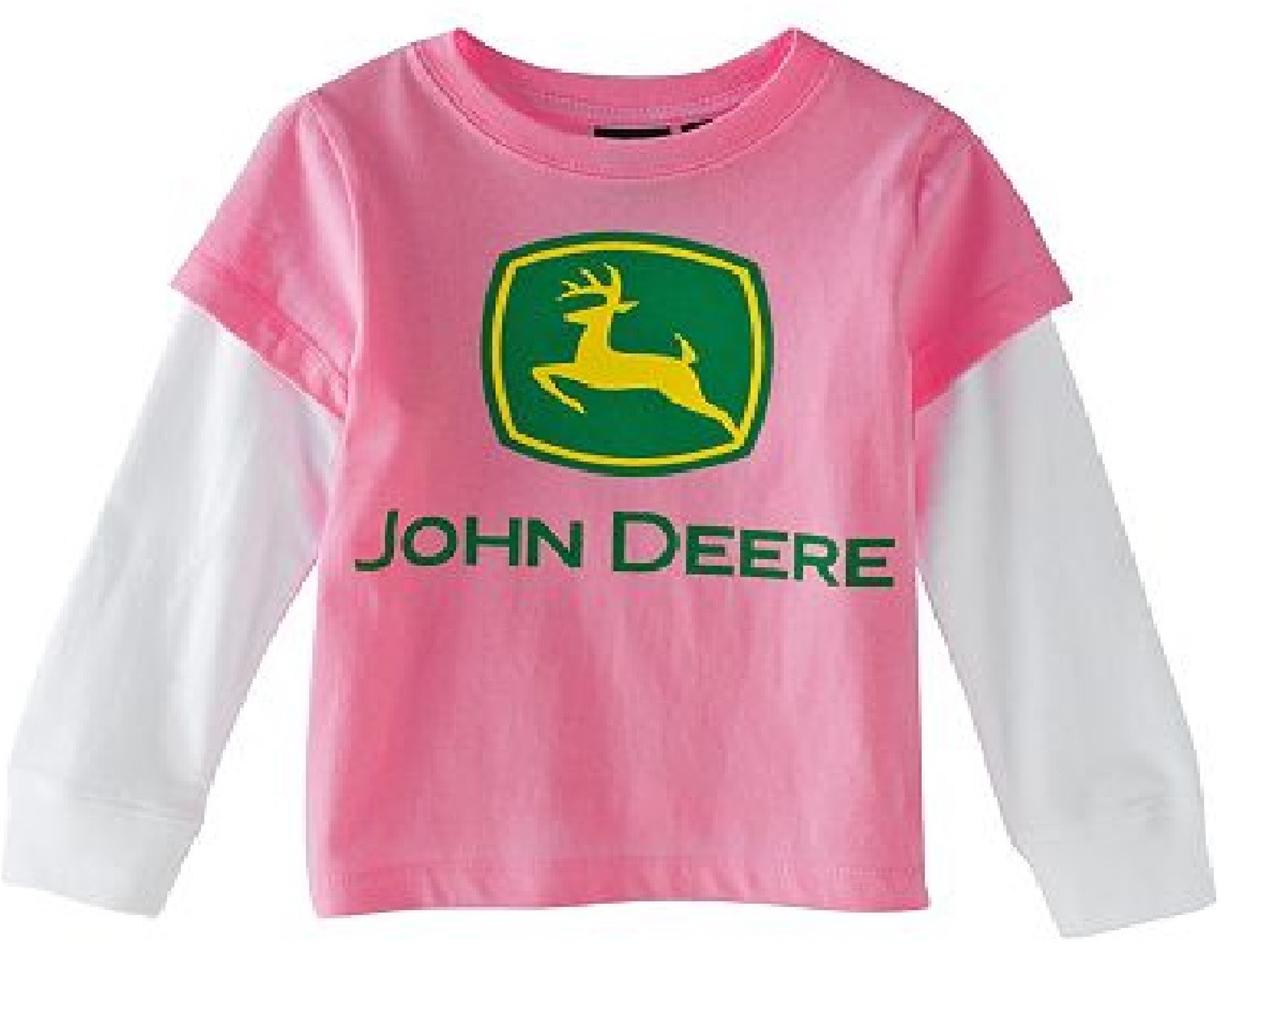 ... Baby & Toddler Clothing > Girls' Clothing (Newborn-5T) > Tops & T